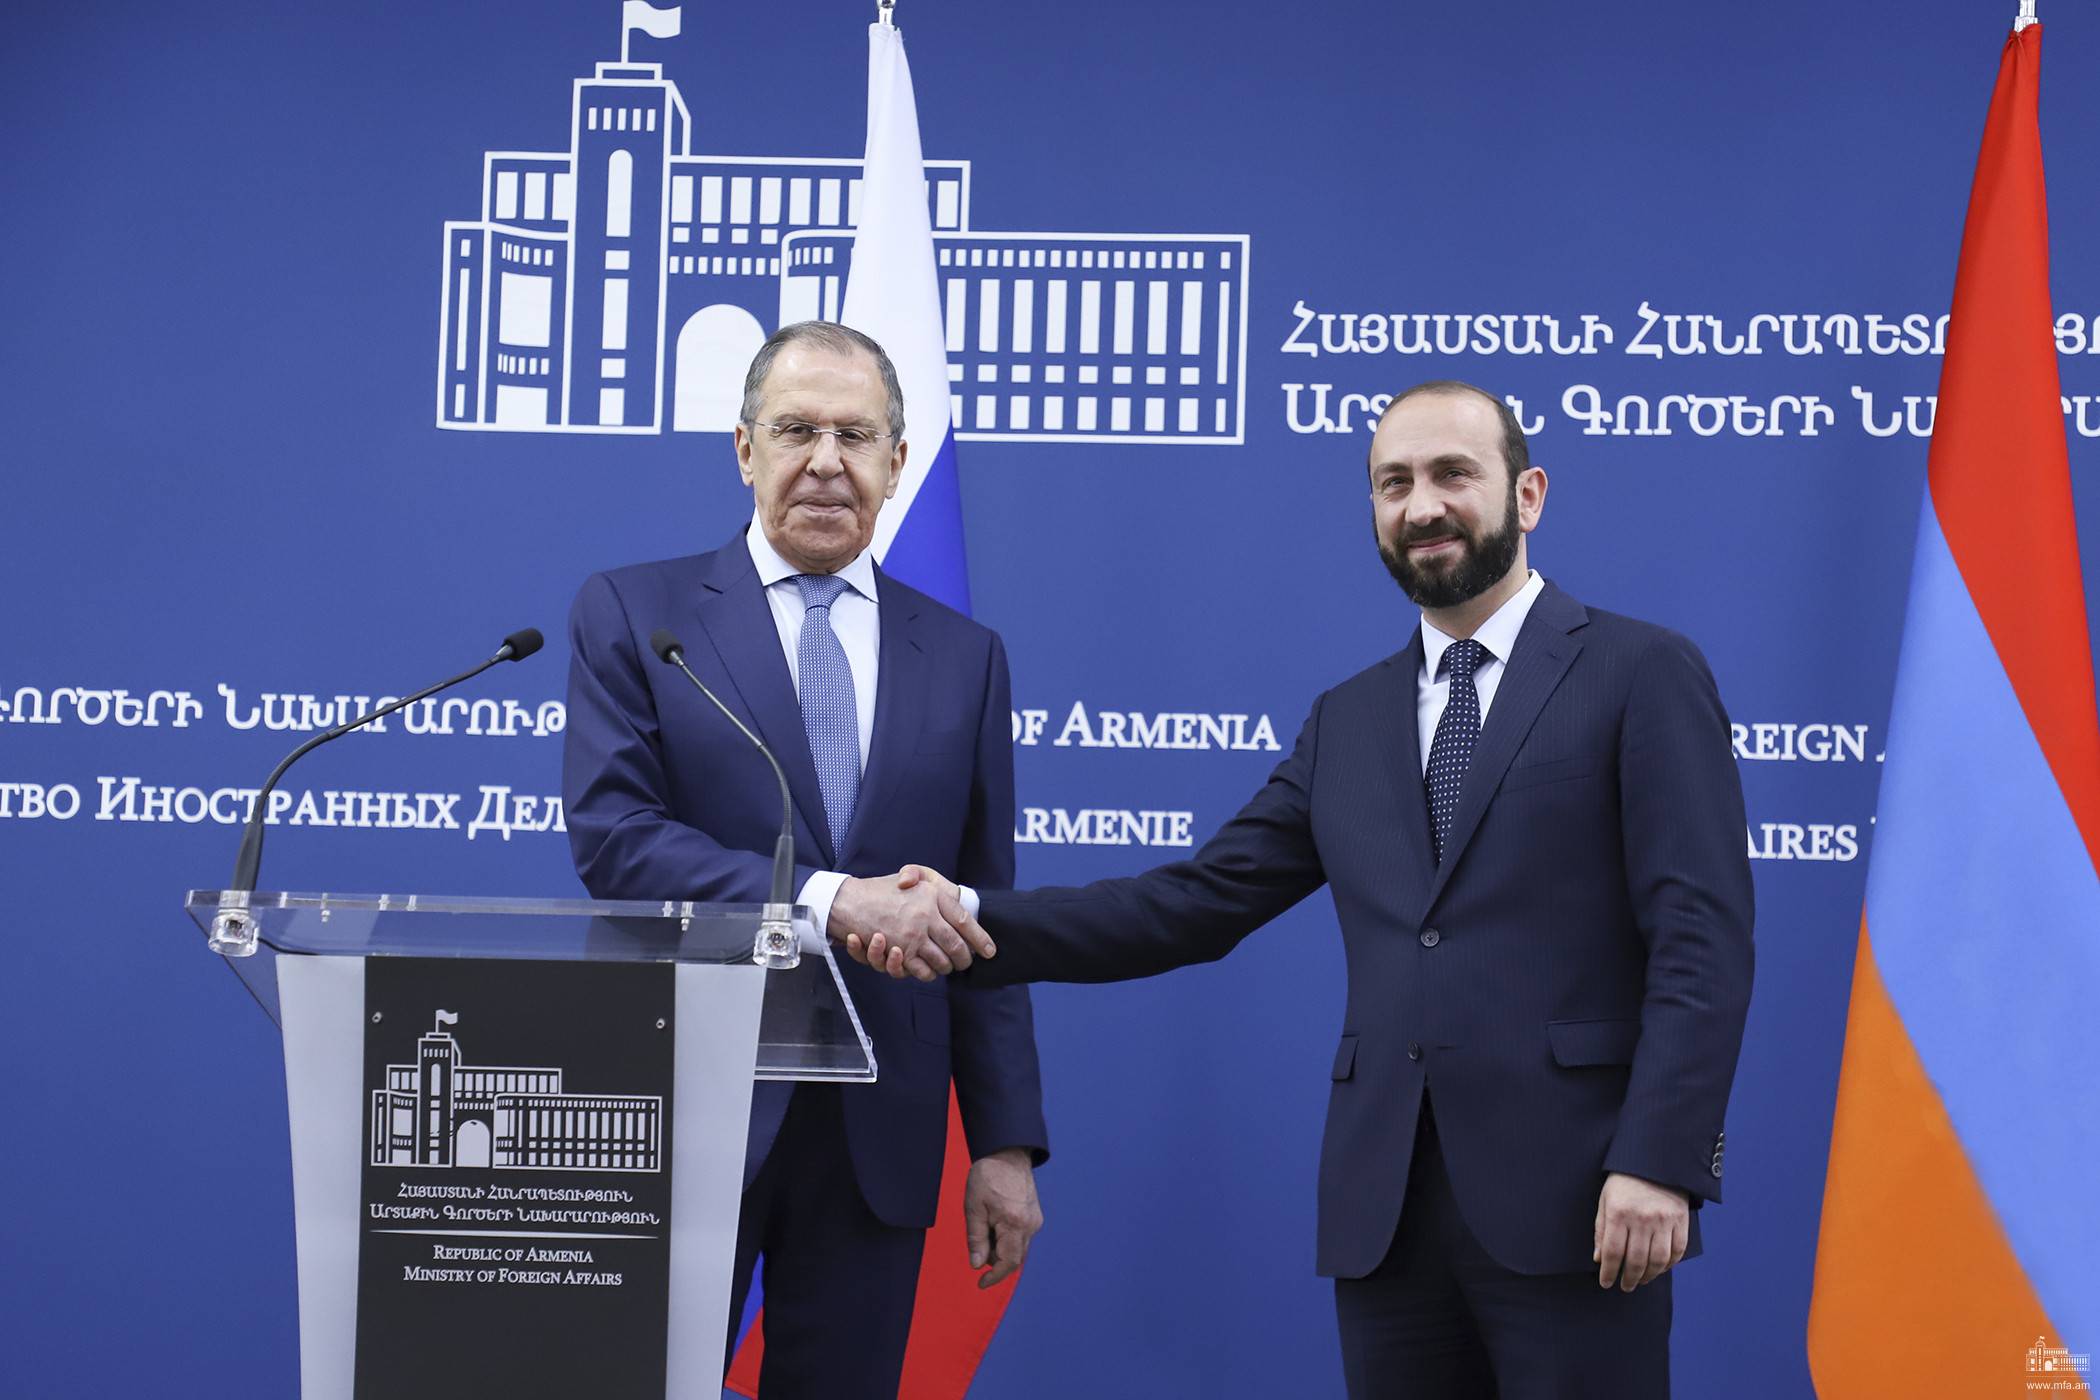 Visit of Russian Foreign Minister Lavrov to Yerevan